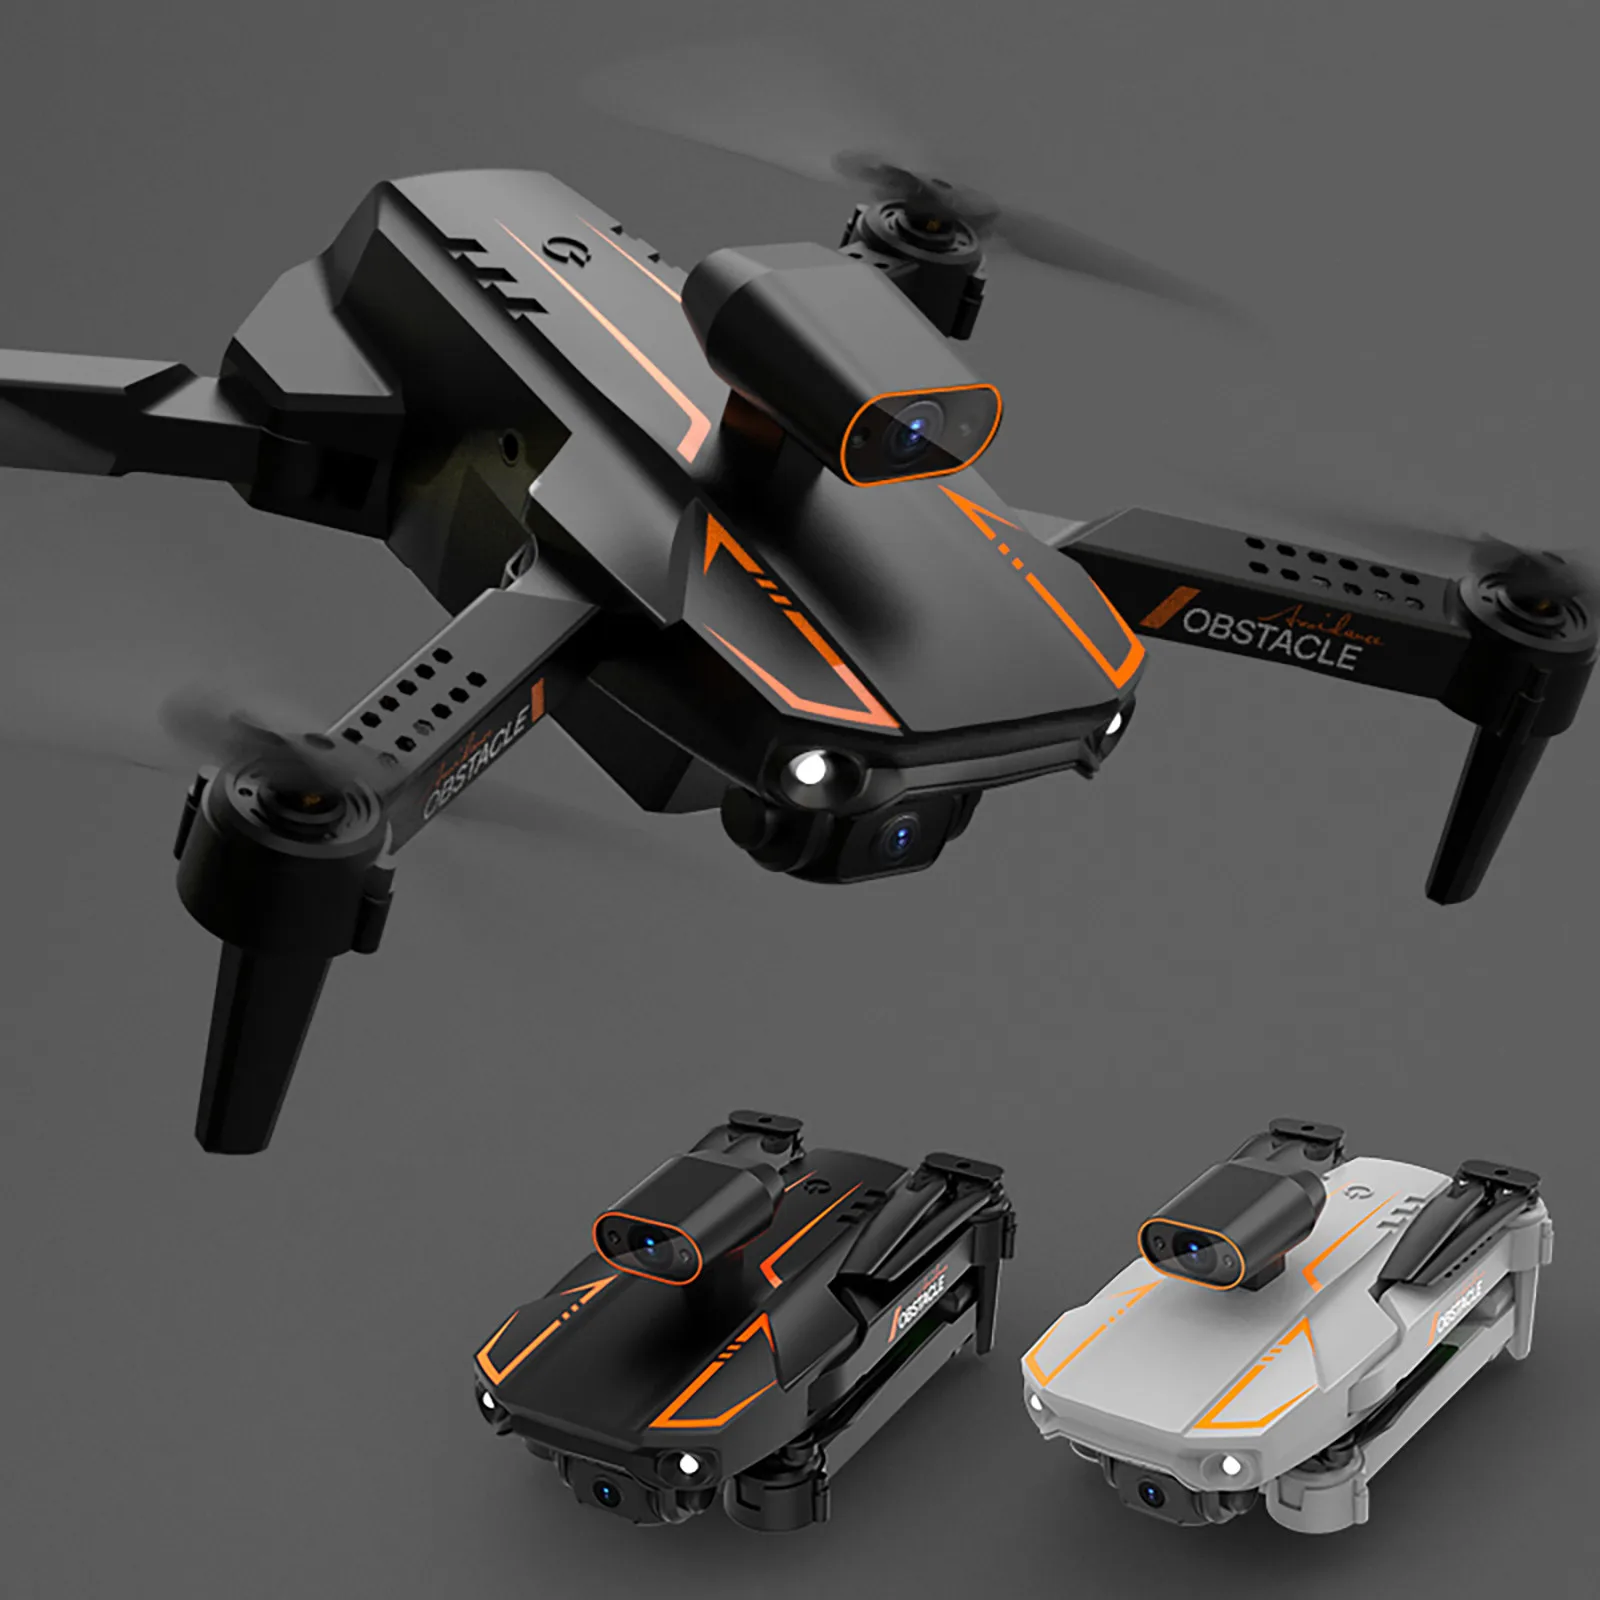 Utoghter S91 Folding Real-time Aerial Photography Four-axis Toy Gift Fixed - £44.86 GBP